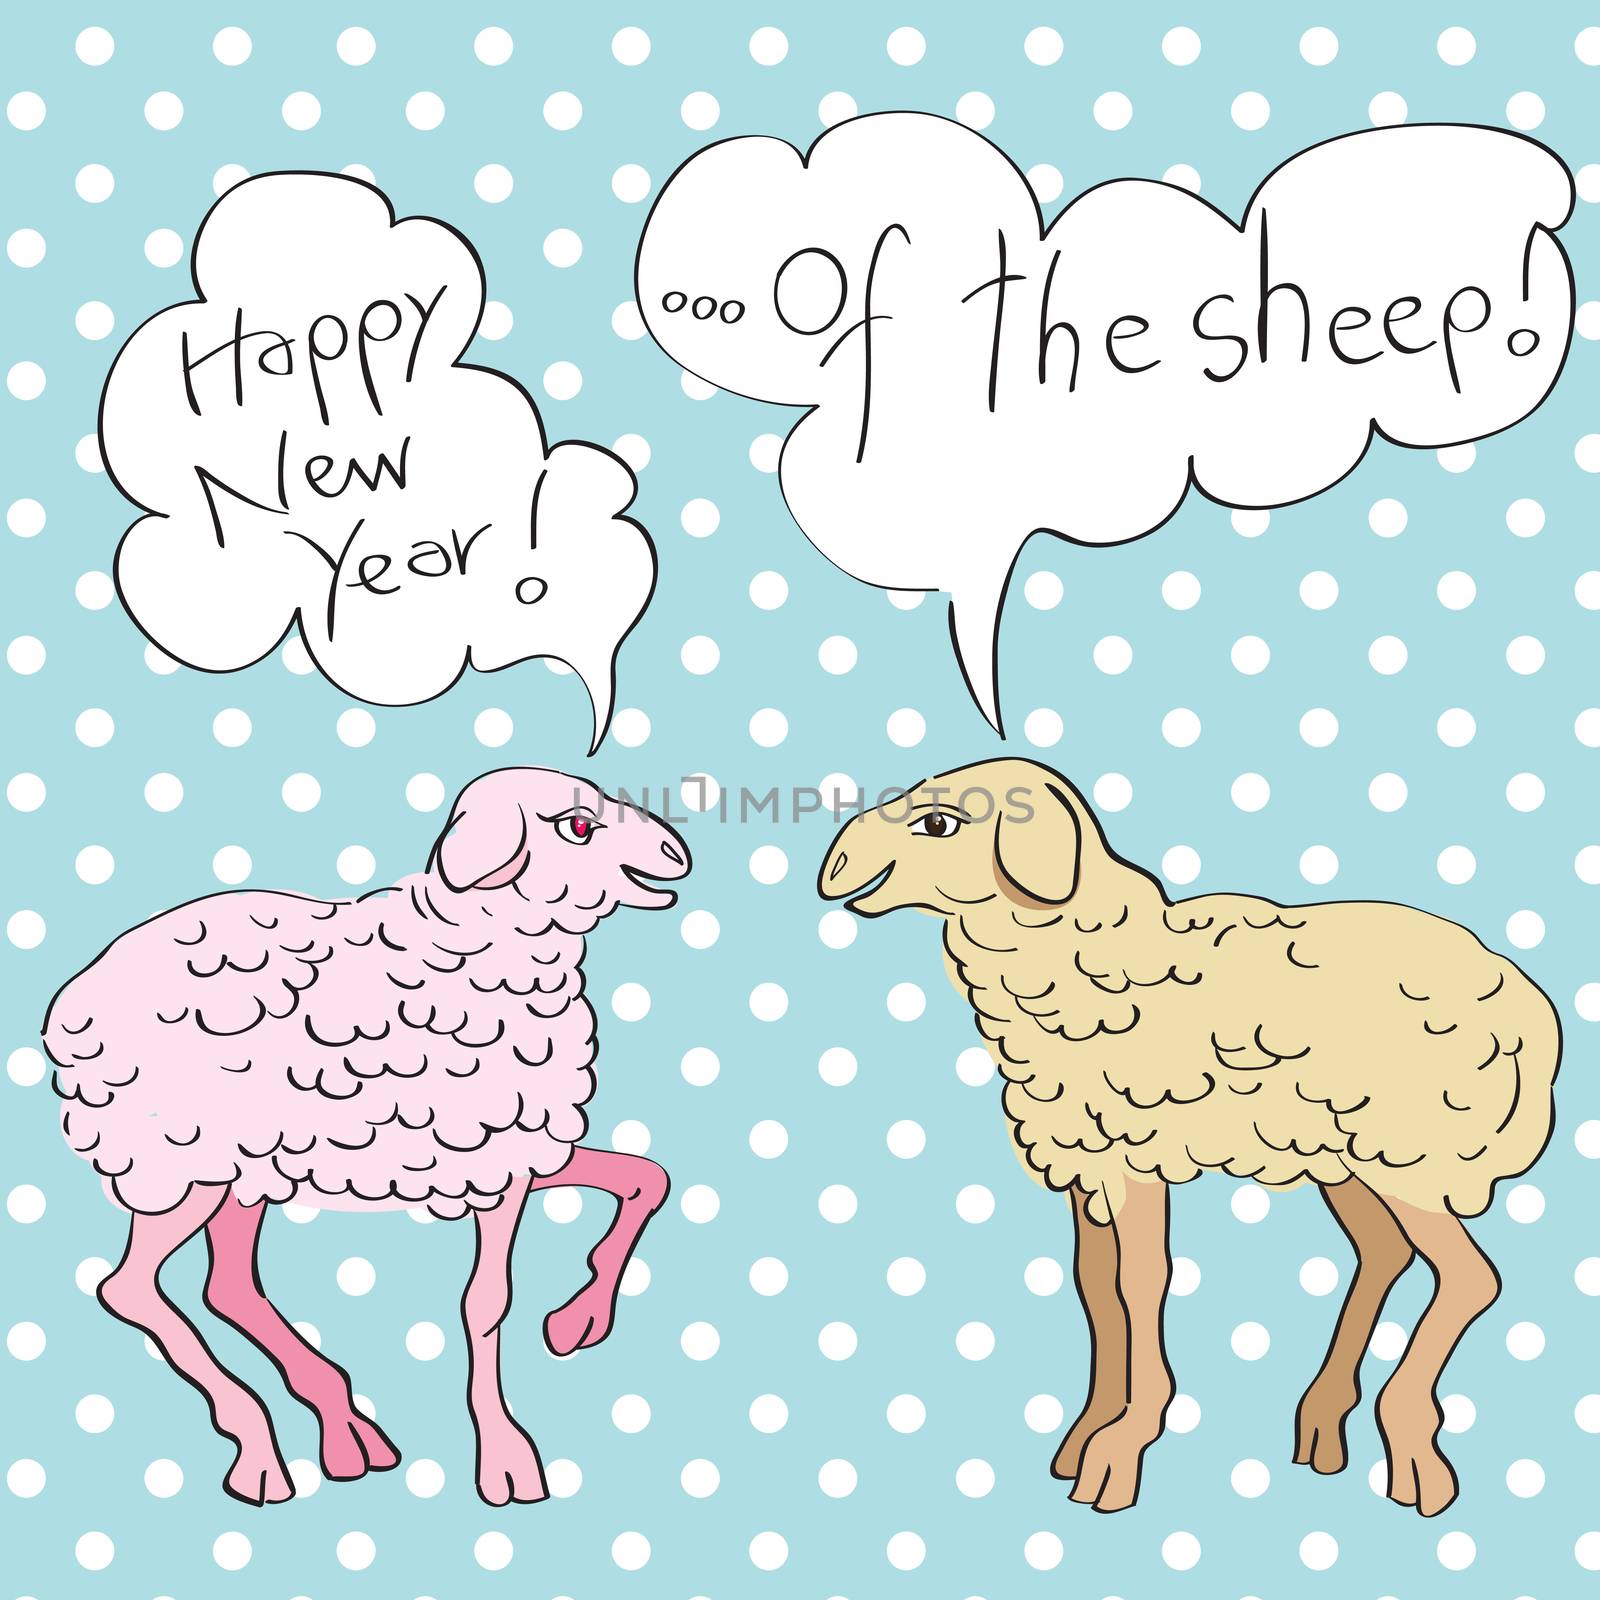 Happy new year of the sheep with conversation in speech bubbles, Pop Art illustration over a background with dots